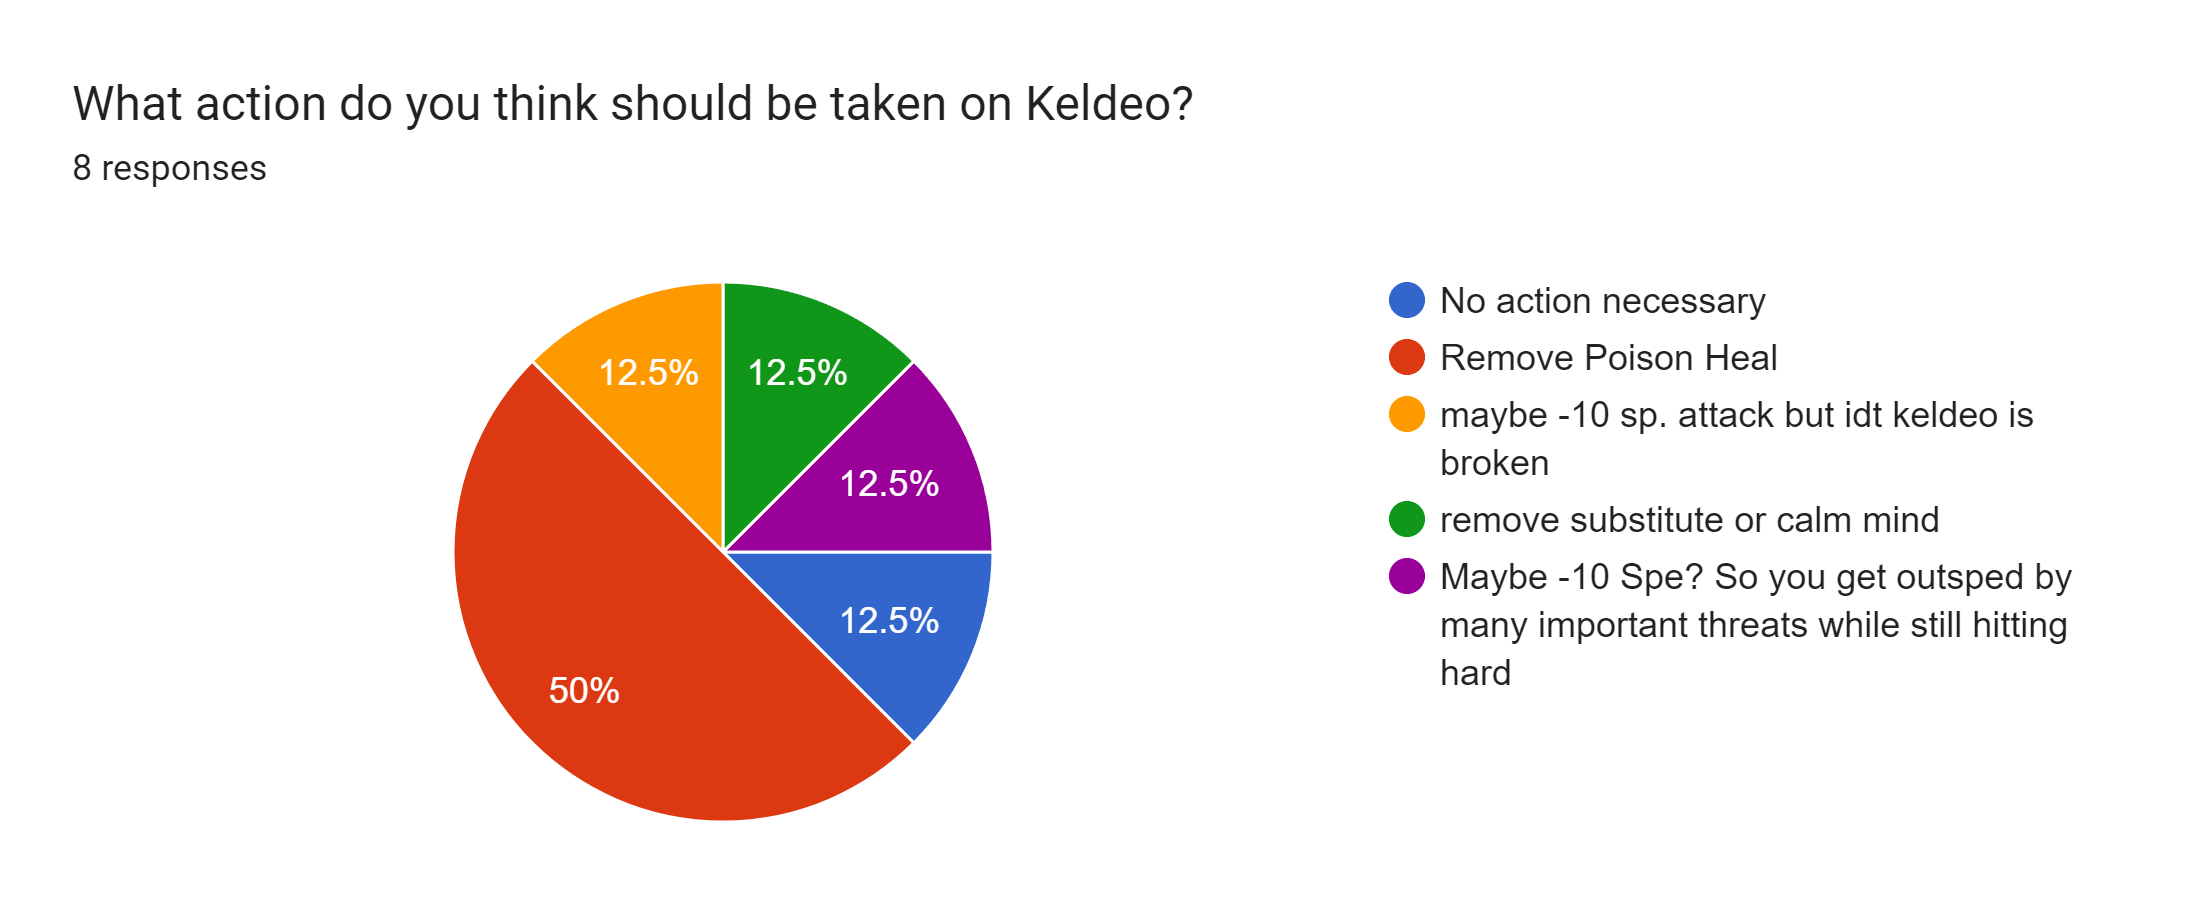 Forms response chart. Question title: What action do you think should be taken on Keldeo?. Number of responses: 8 responses.